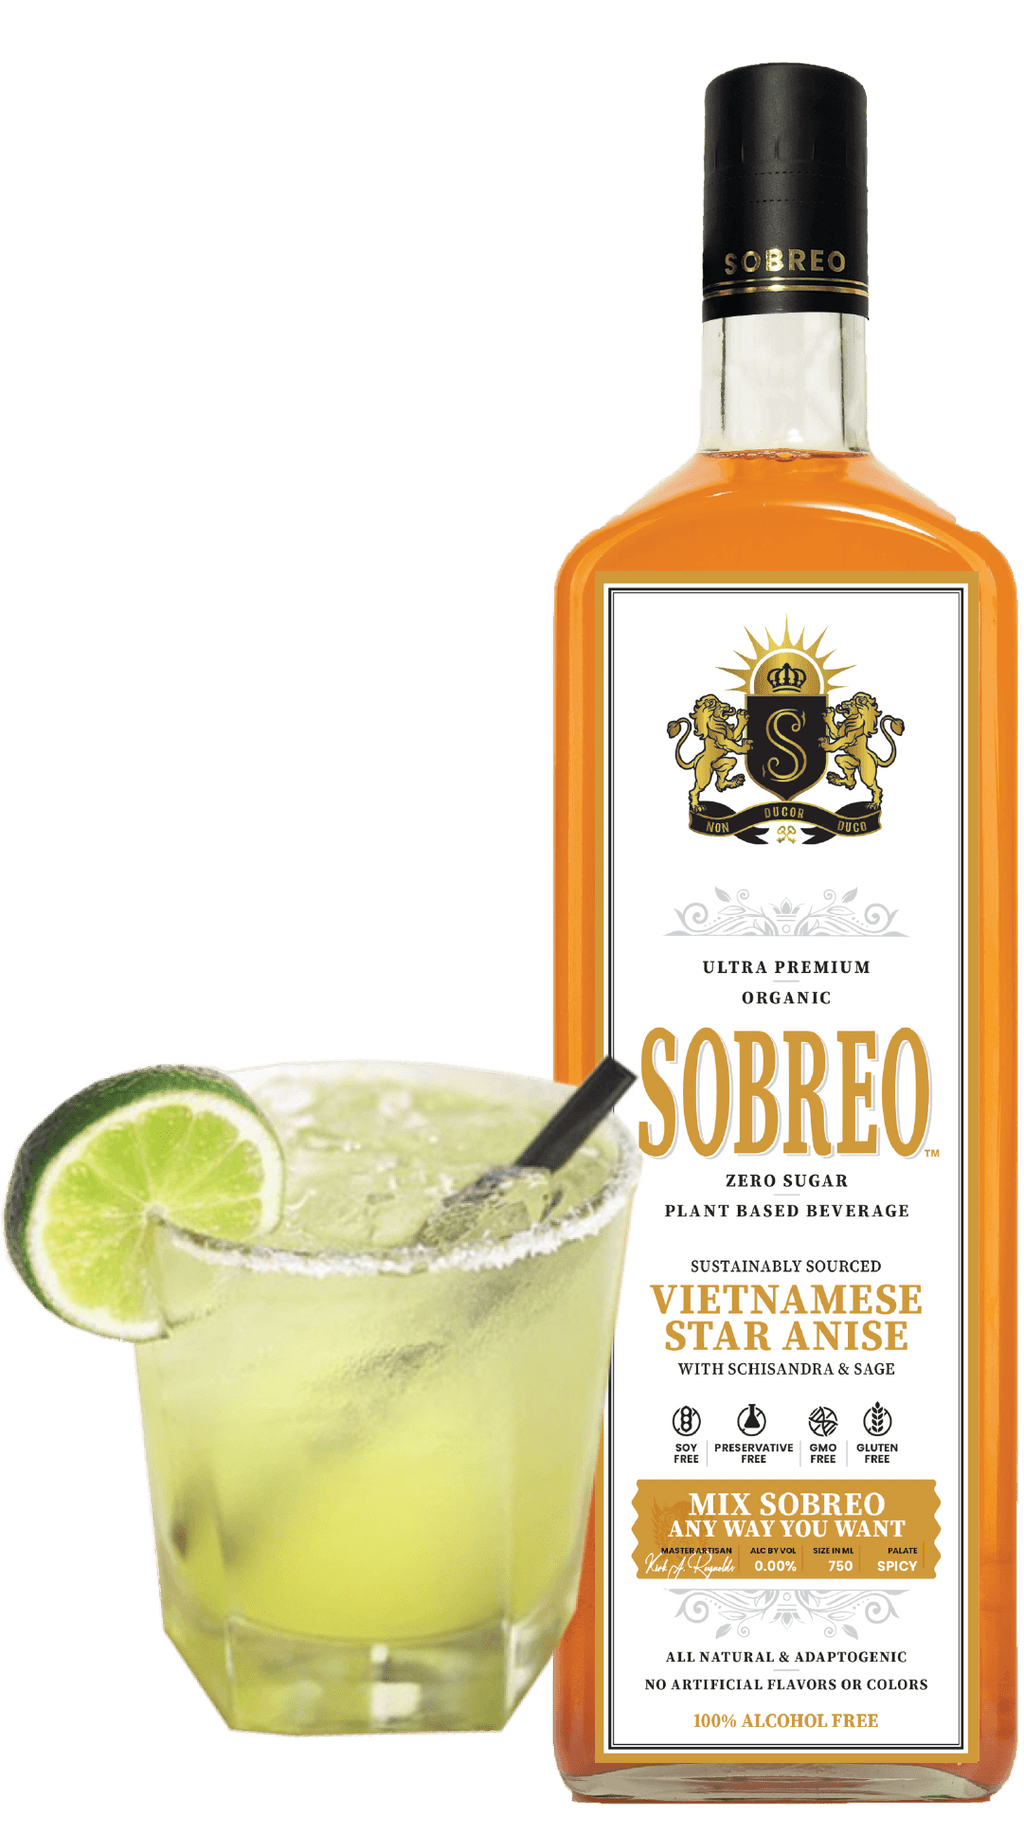 Sobreo non alcoholic cocktail and mocktail mixer in Vietnamese Star Anise spicy flavor perfect to infuse into a tequila spicy margarita recipe